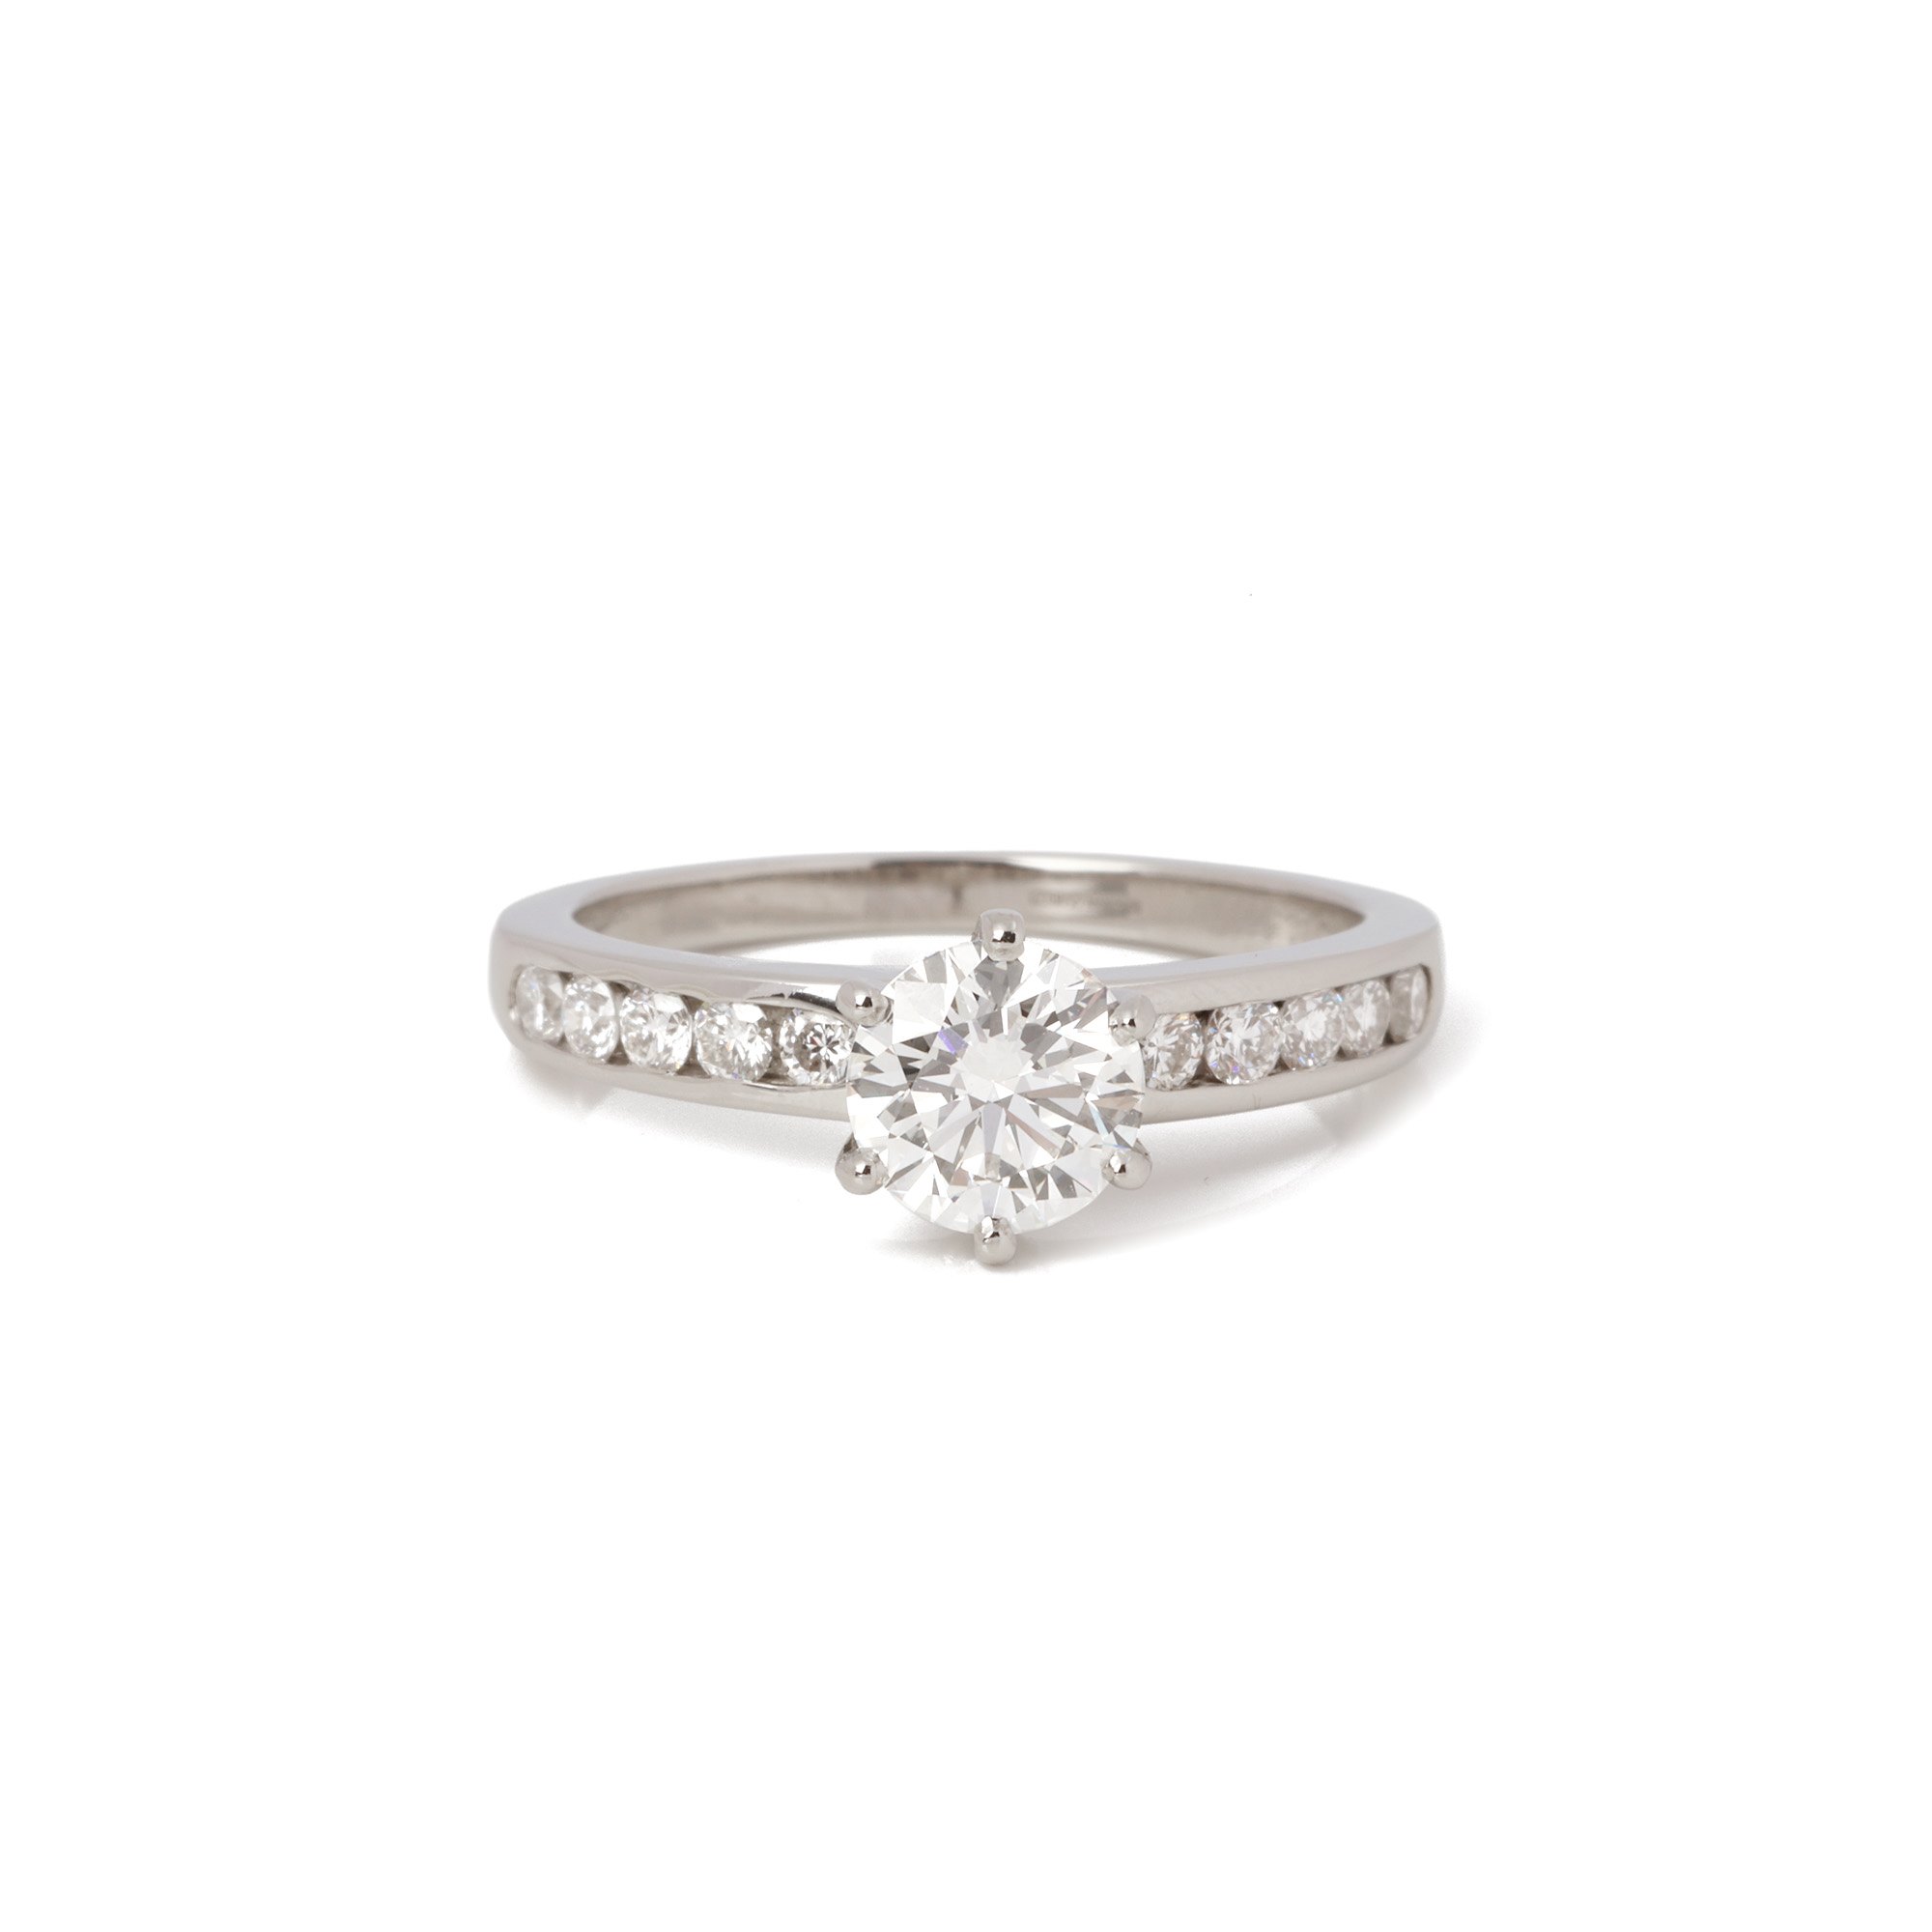 Tiffany & Co. 1.03ct Brilliant Cut Solitaire Ring with Diamond Band